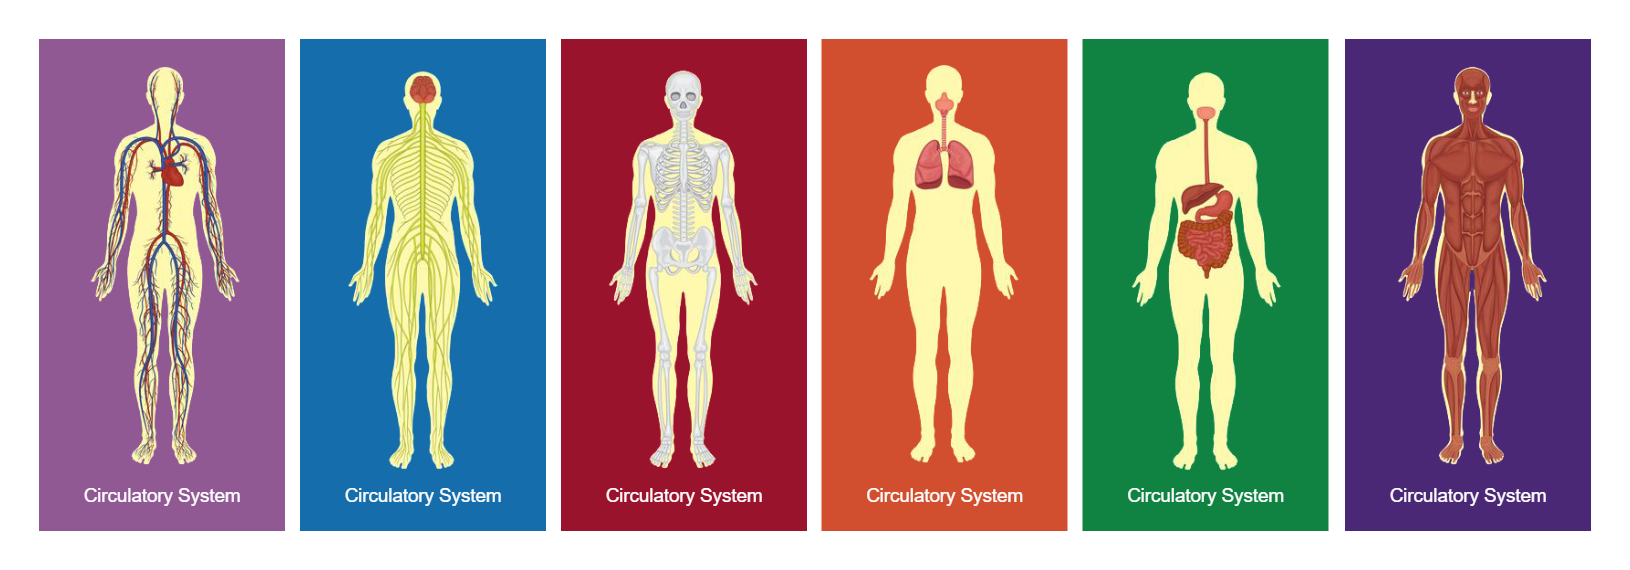 Different Systems of Human Body Diagram